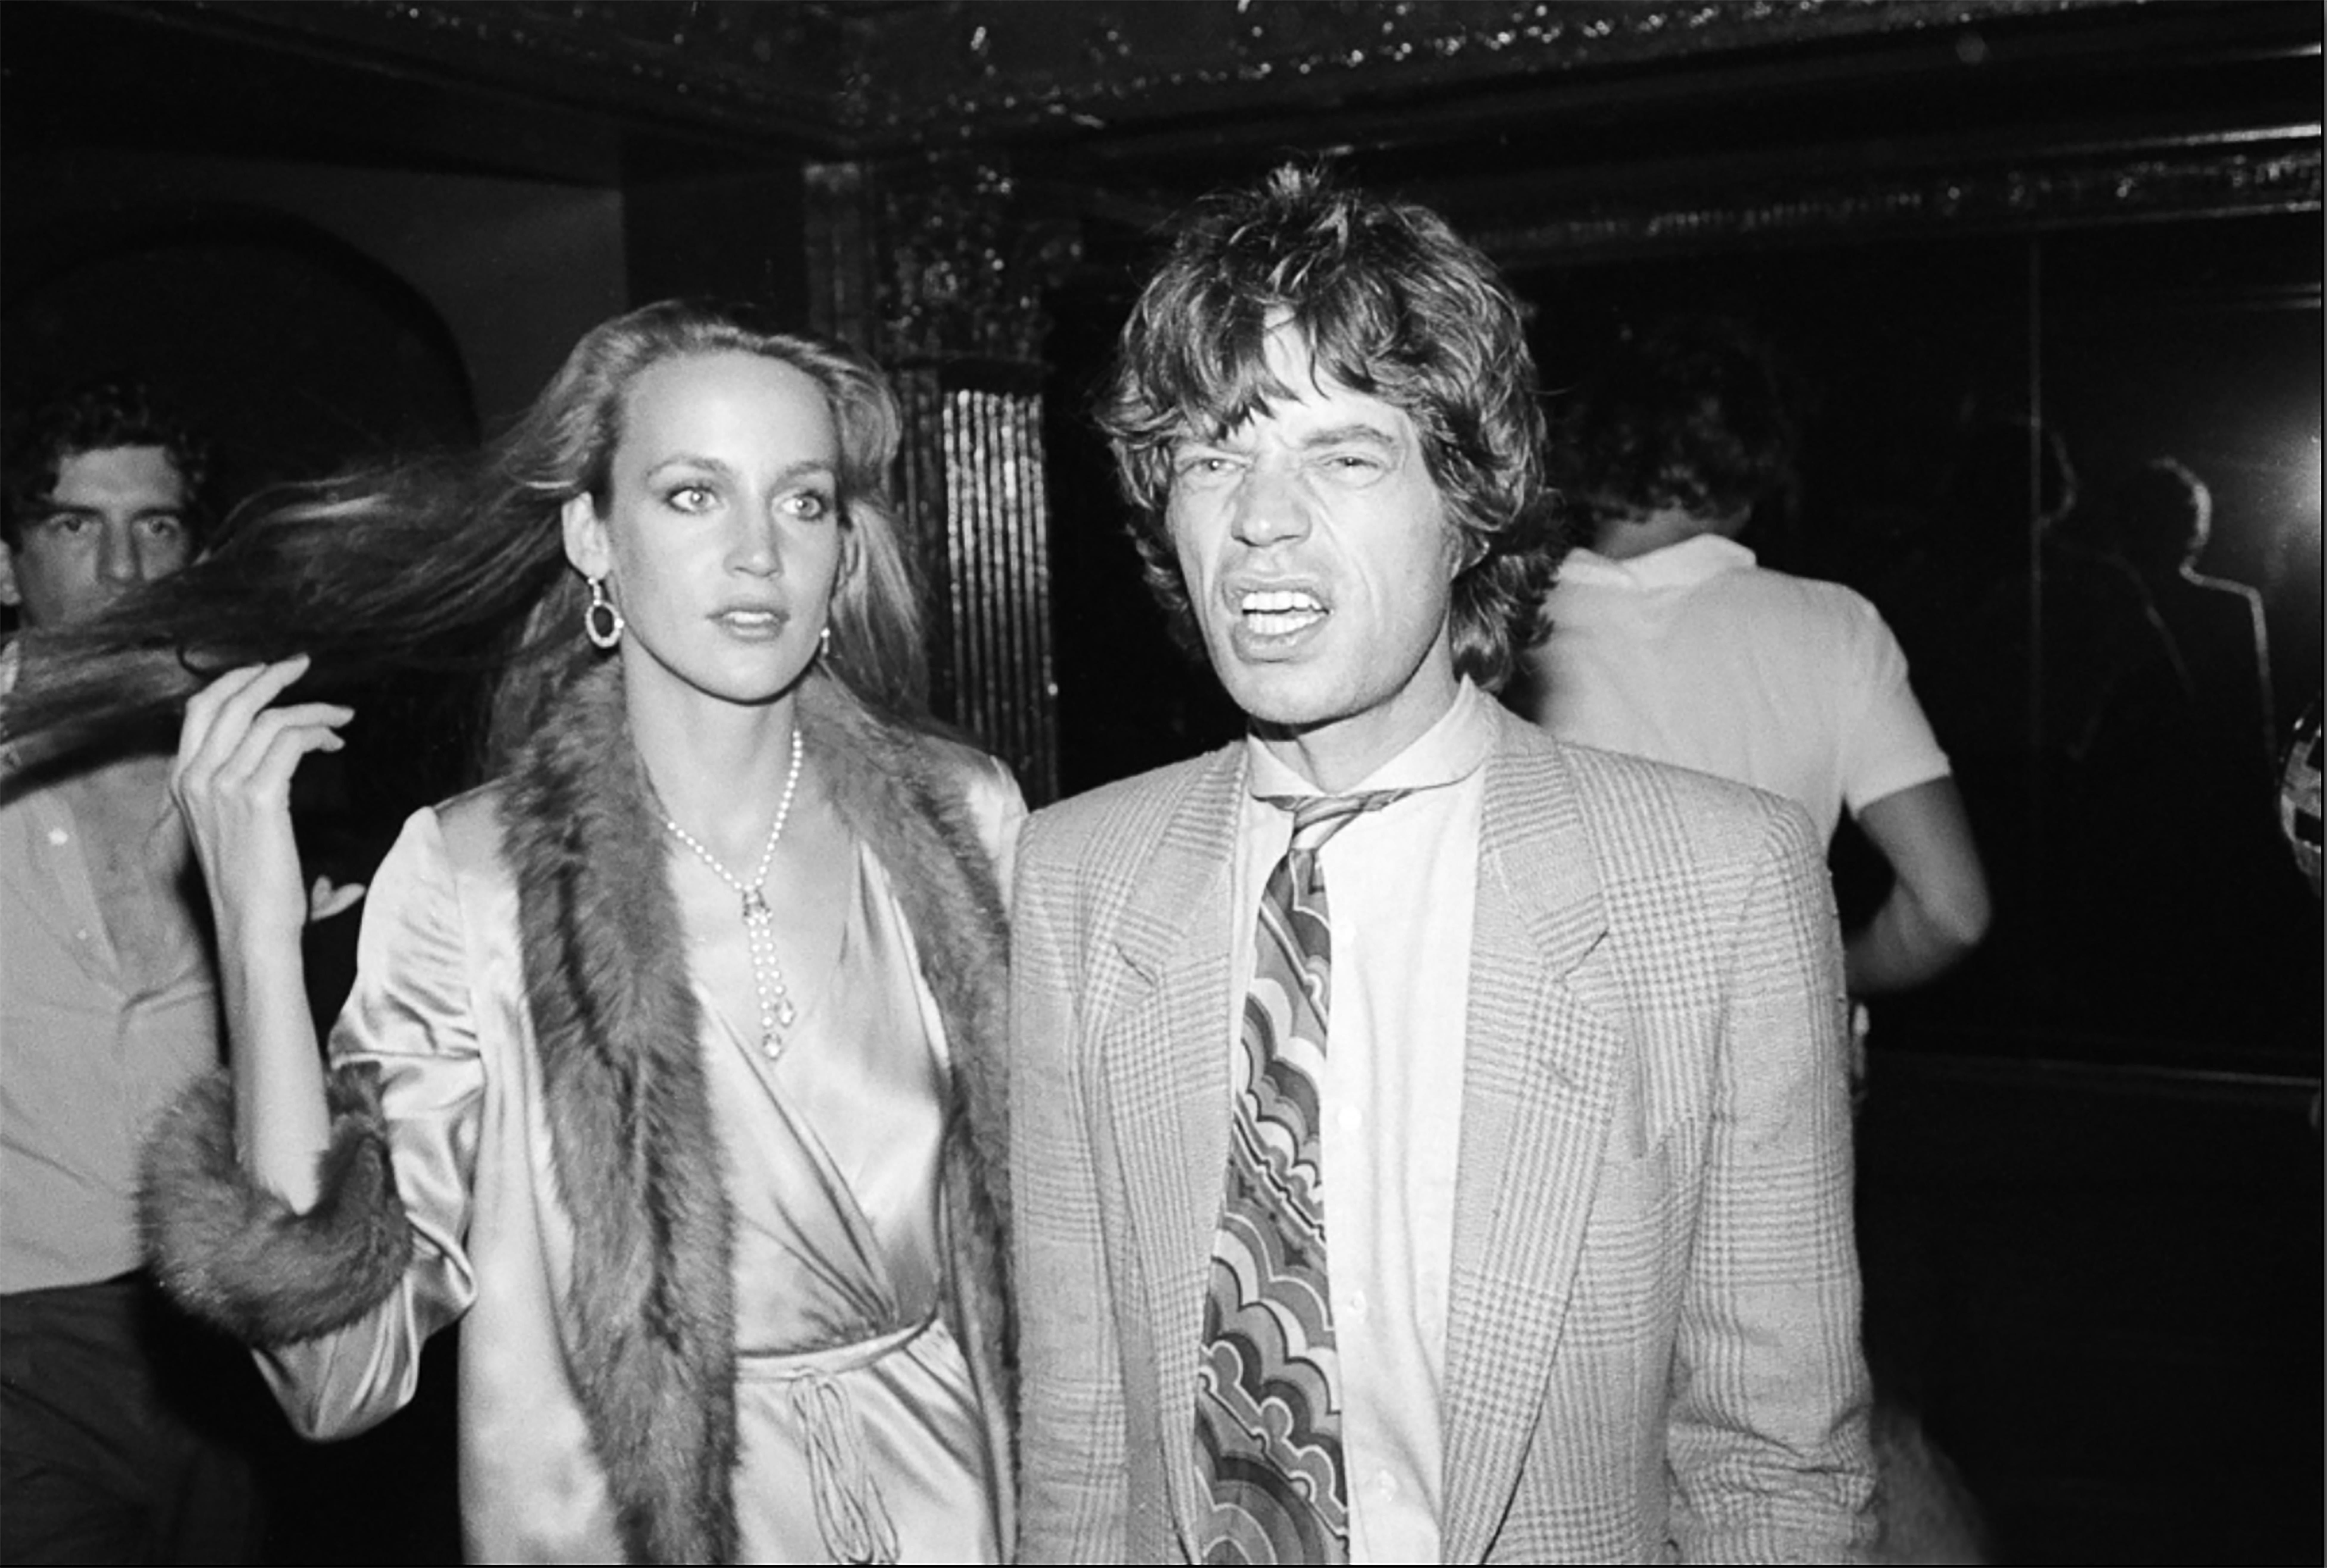 Allan Tannenbaum Black and White Photograph - Mick Jagger & Jerry Hall, 2nd Anniversary Party, Studio 54 NYC 1979